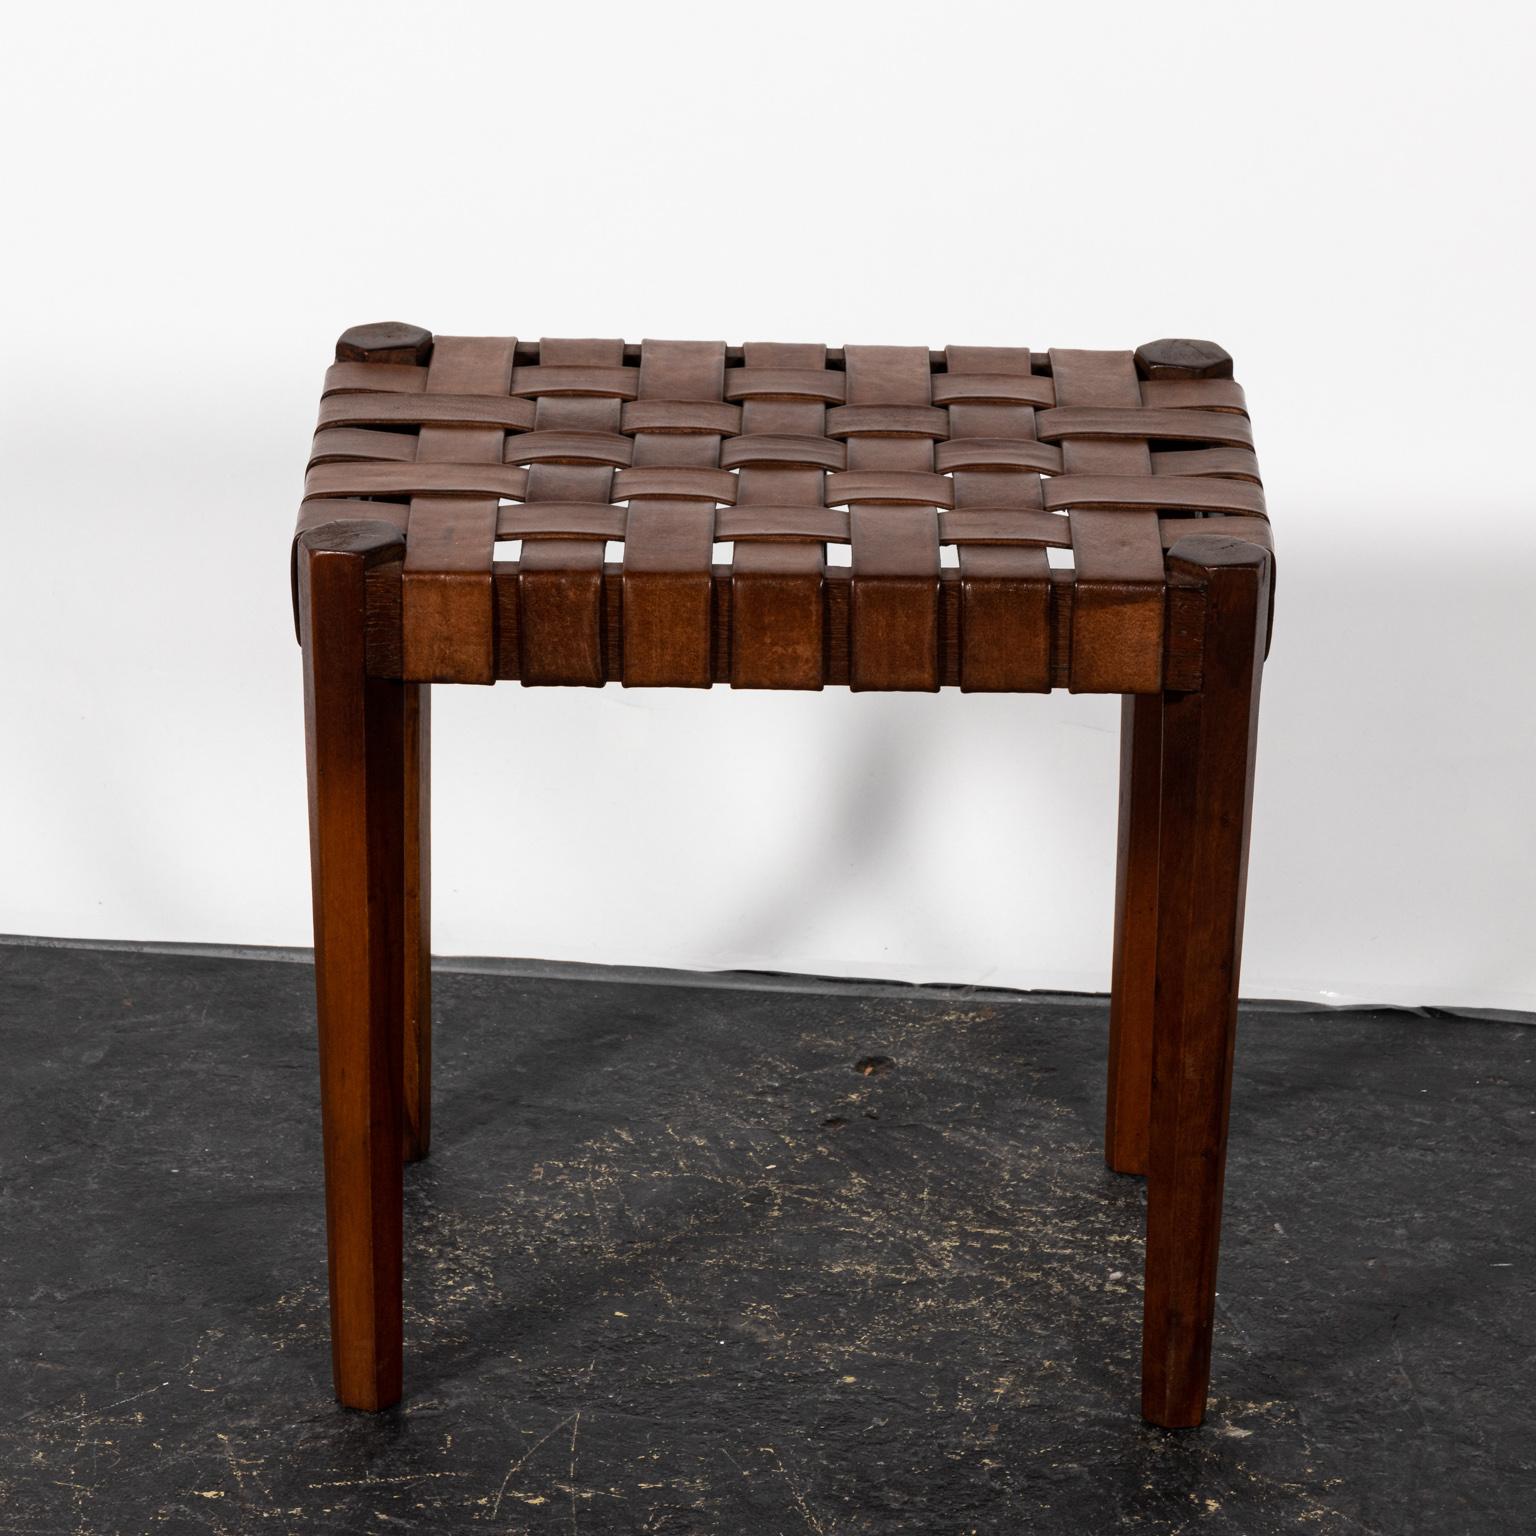 Woven leather stools on a wood frame. Please note of wear consistent with age including chips and minor finish loss.